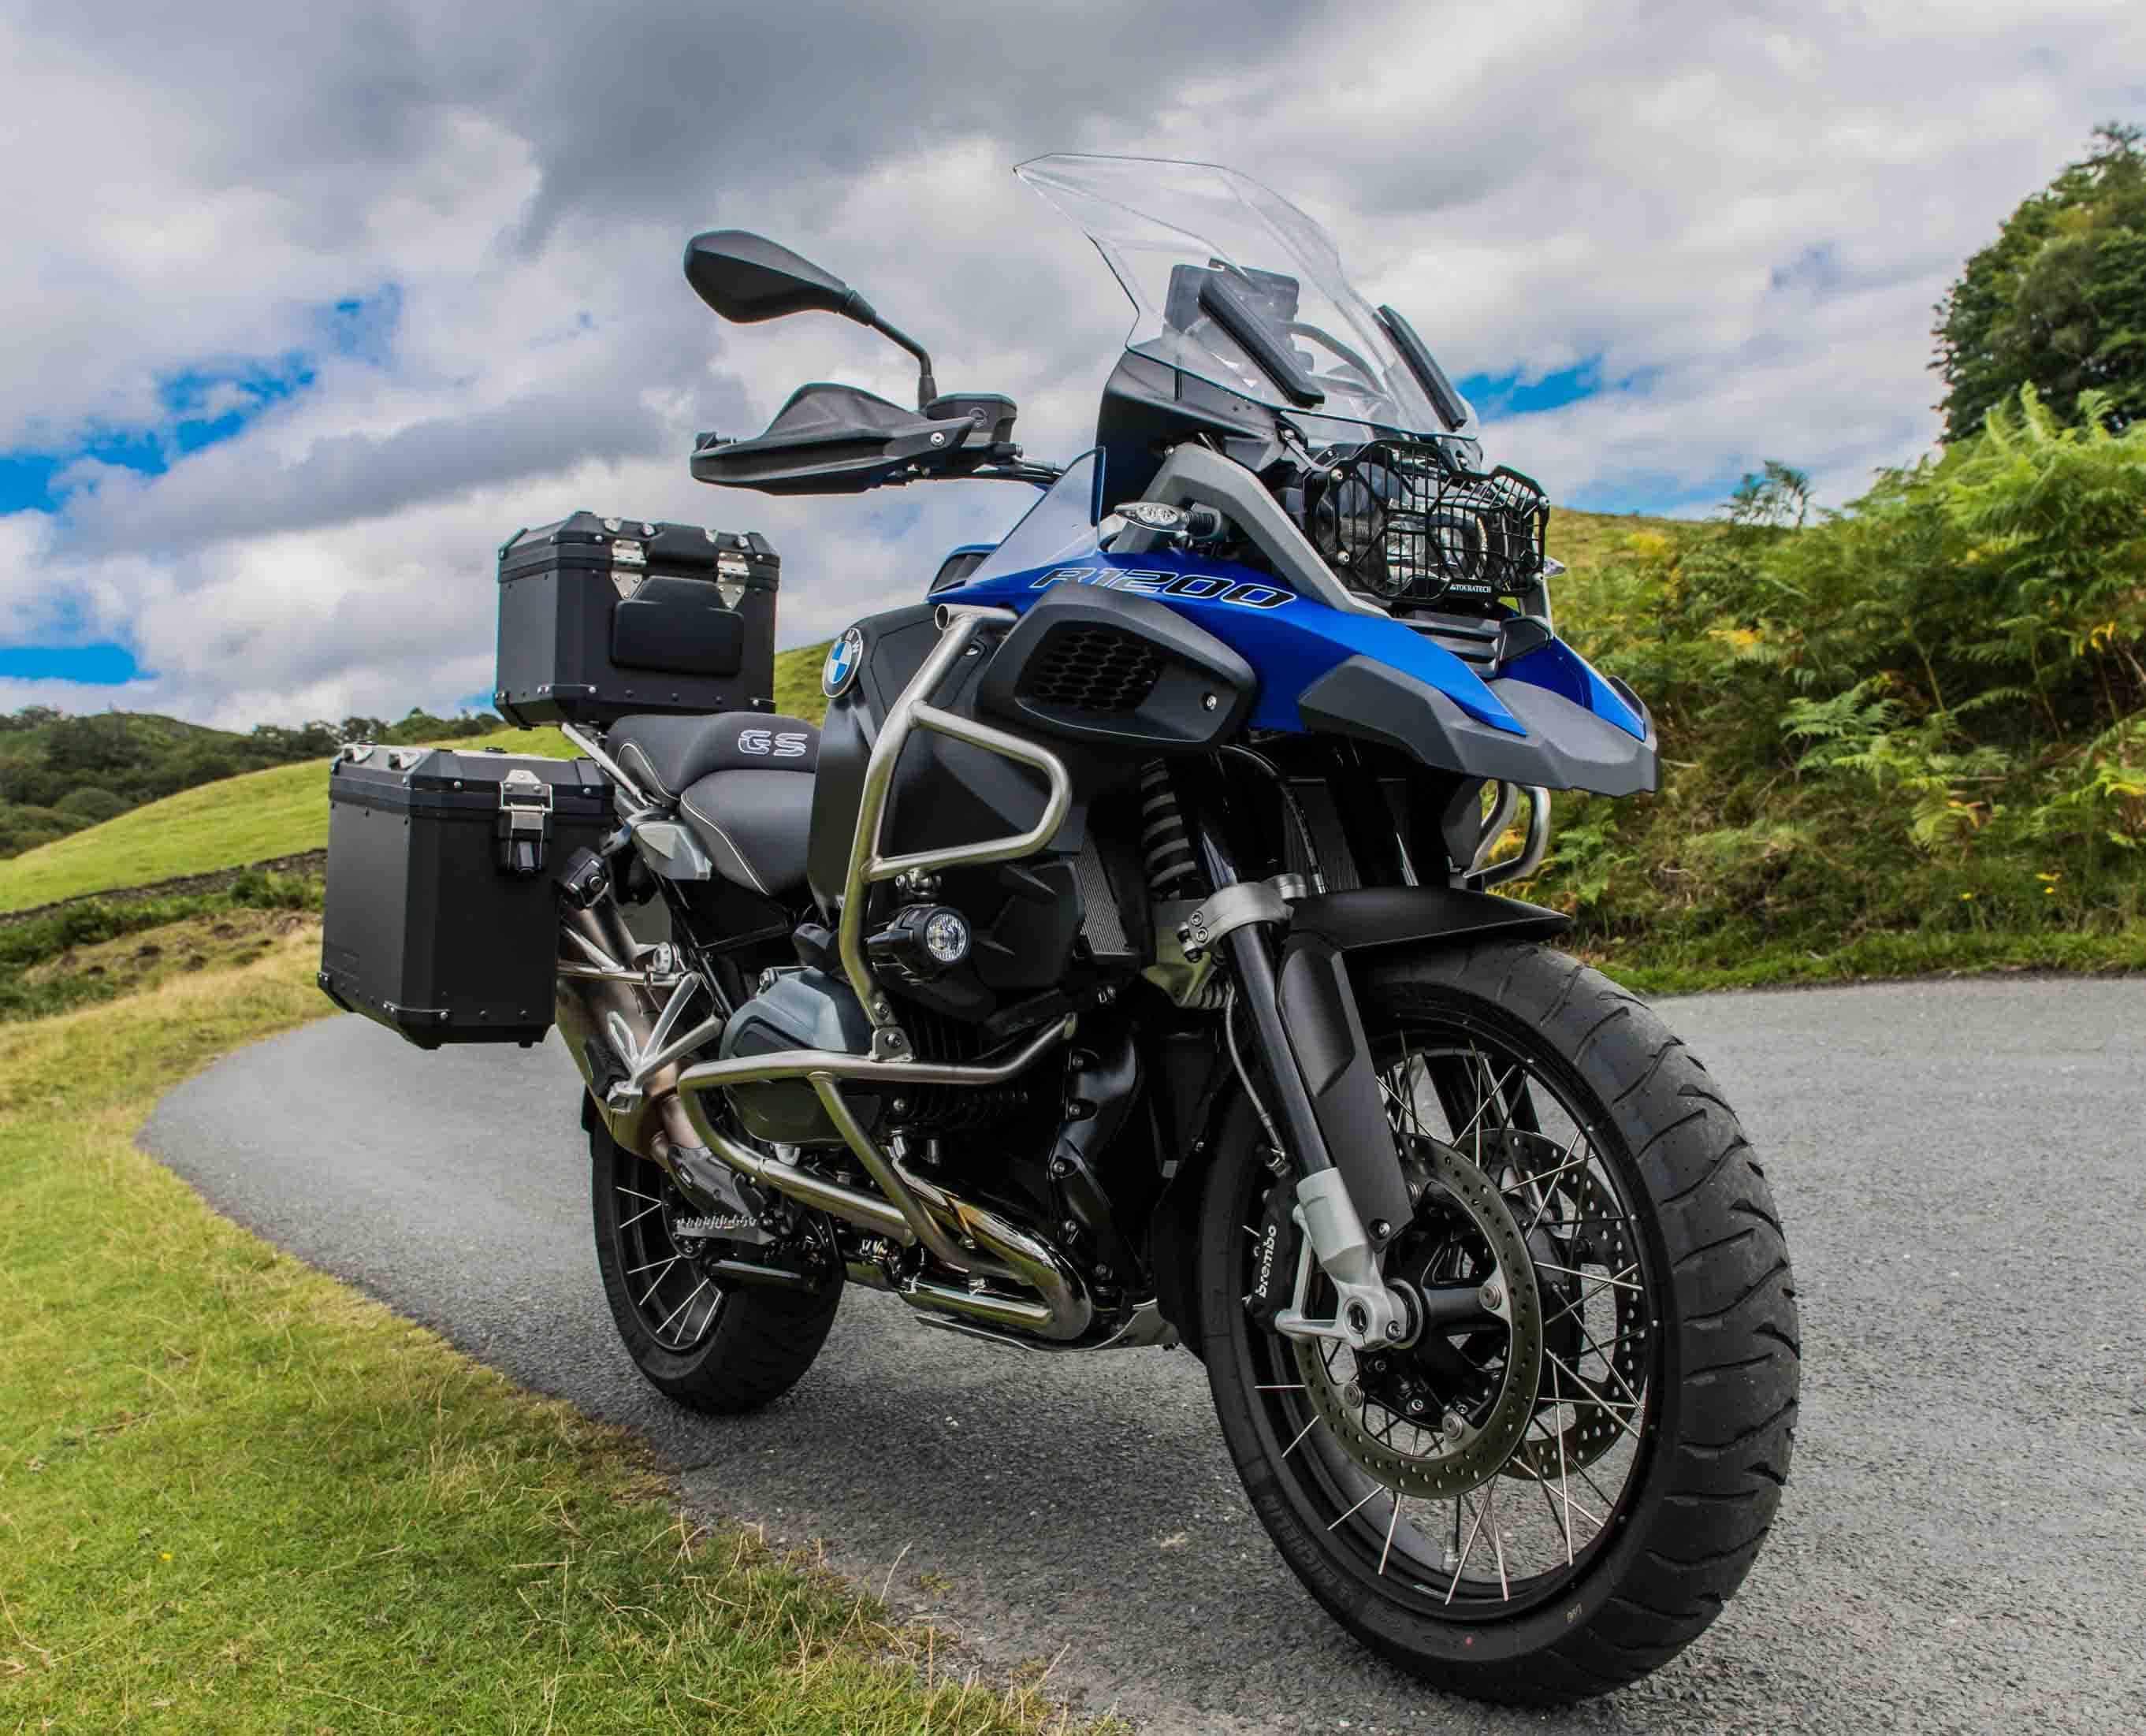 BMW R1200 GS Adventure Motorcycle